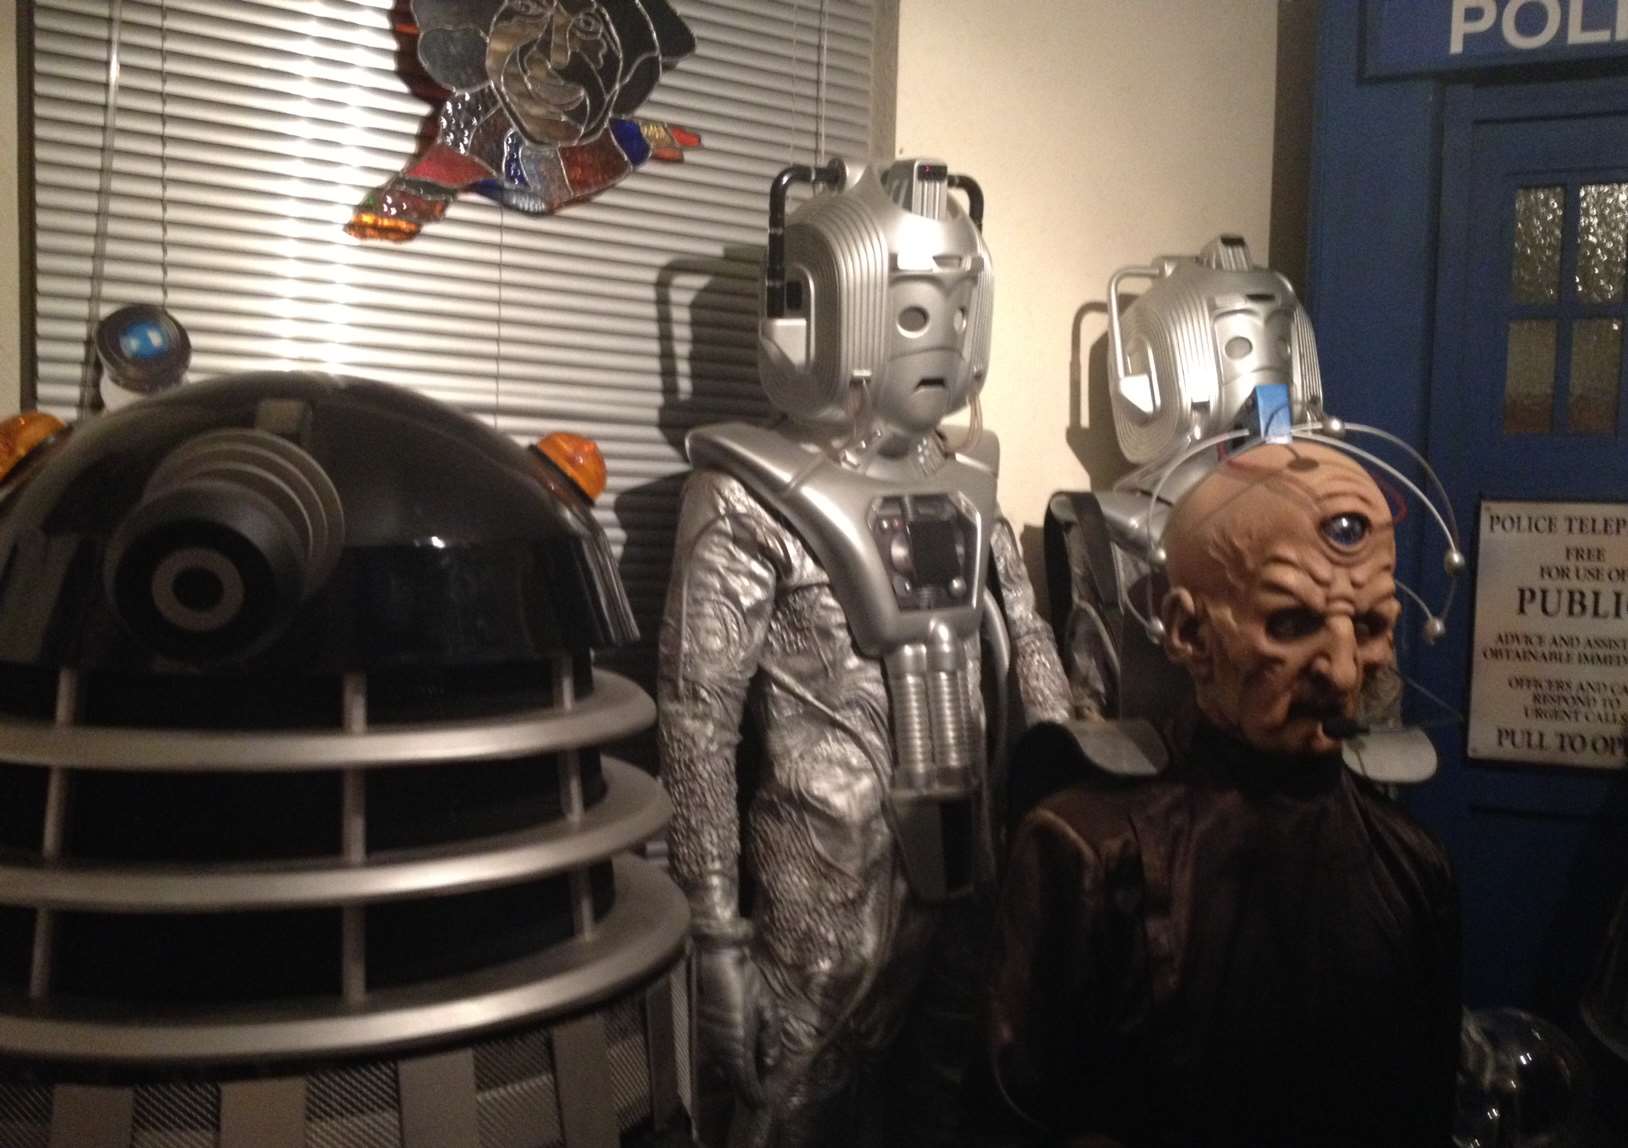 A Dalek, Davros and Cybermen are just some of the characters in Peter Trott's lounge